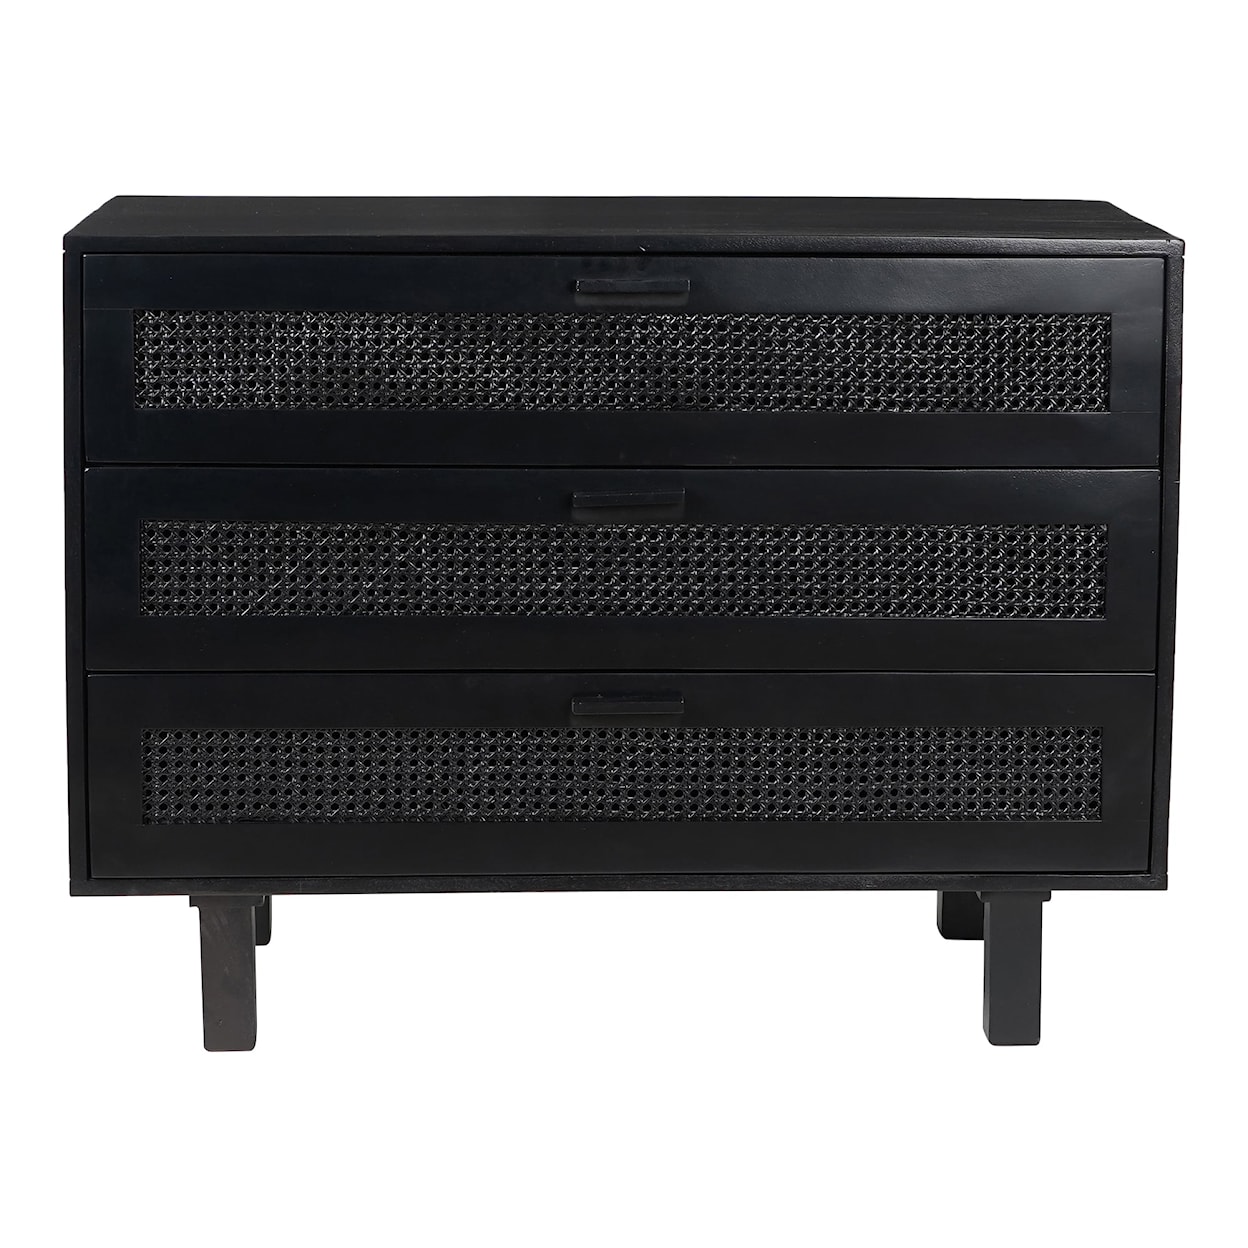 Moe's Home Collection Ashton 3-Drawer Chest